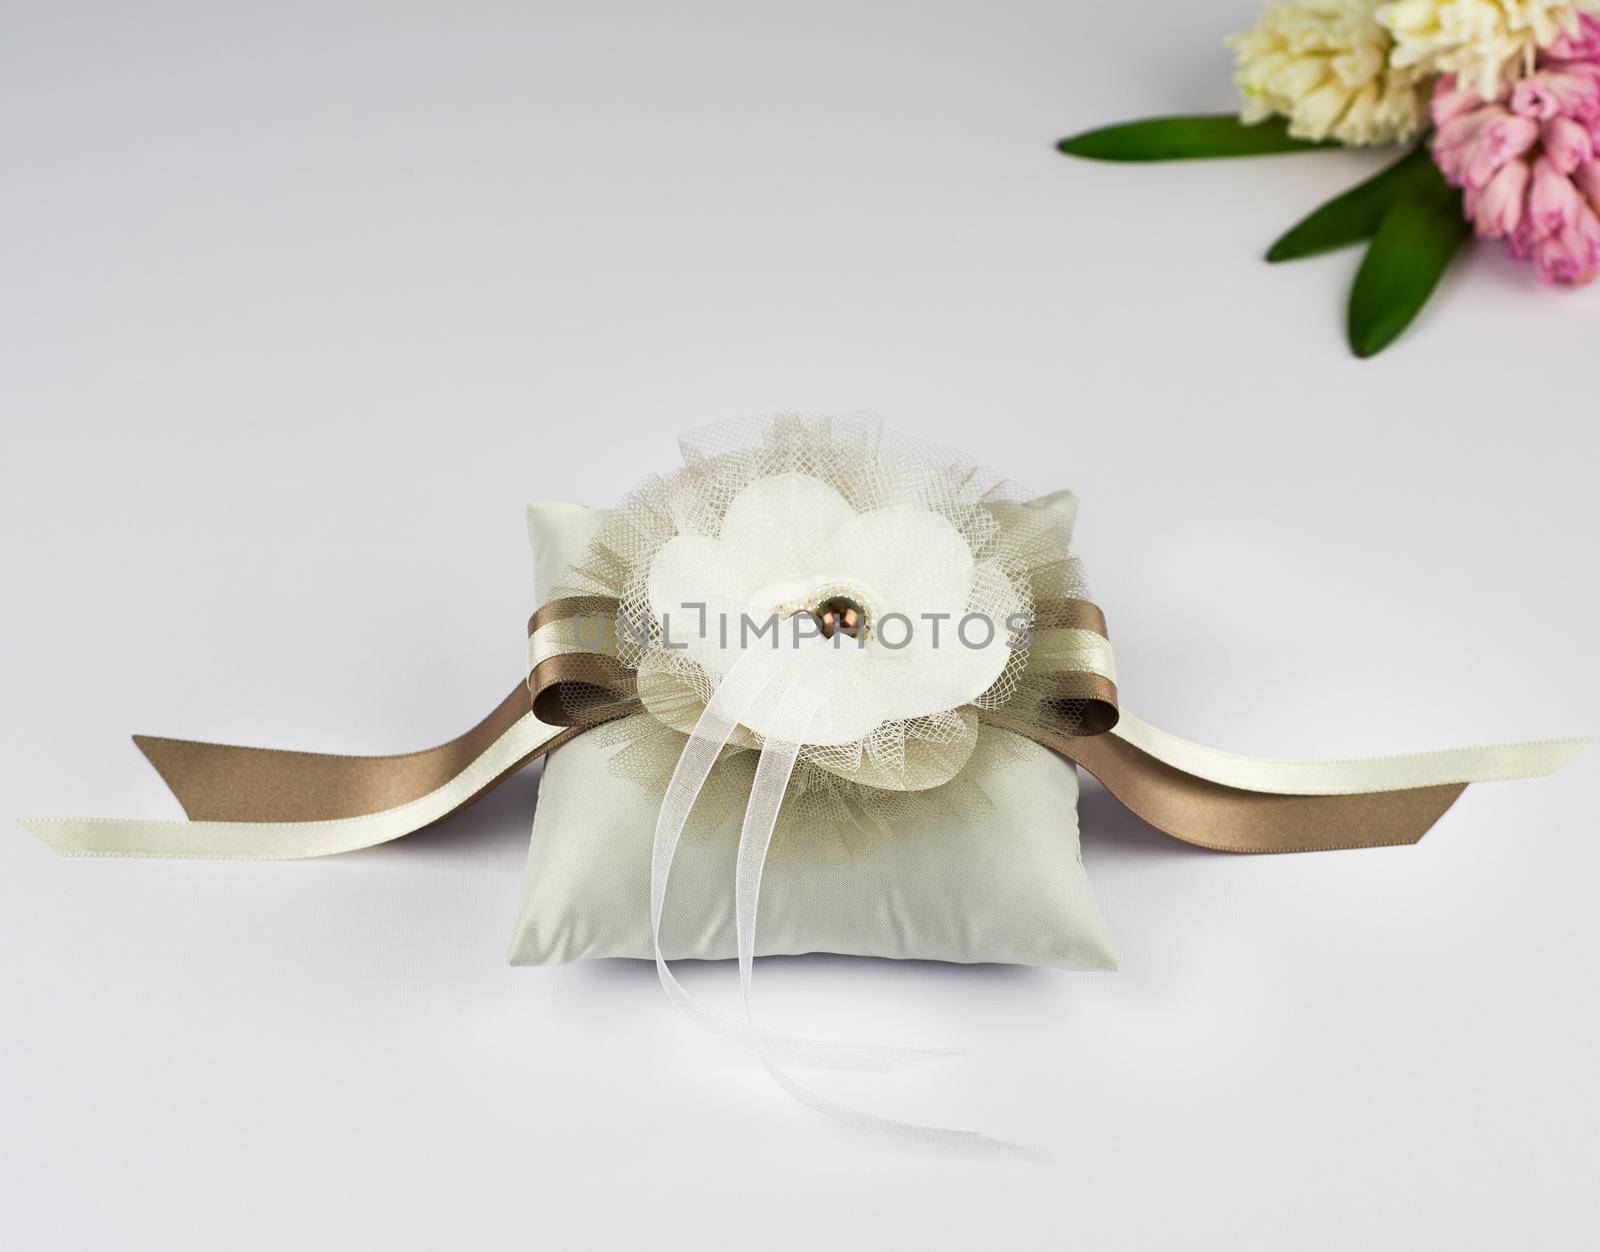 Exquisite pillow for wedding rings on gray background